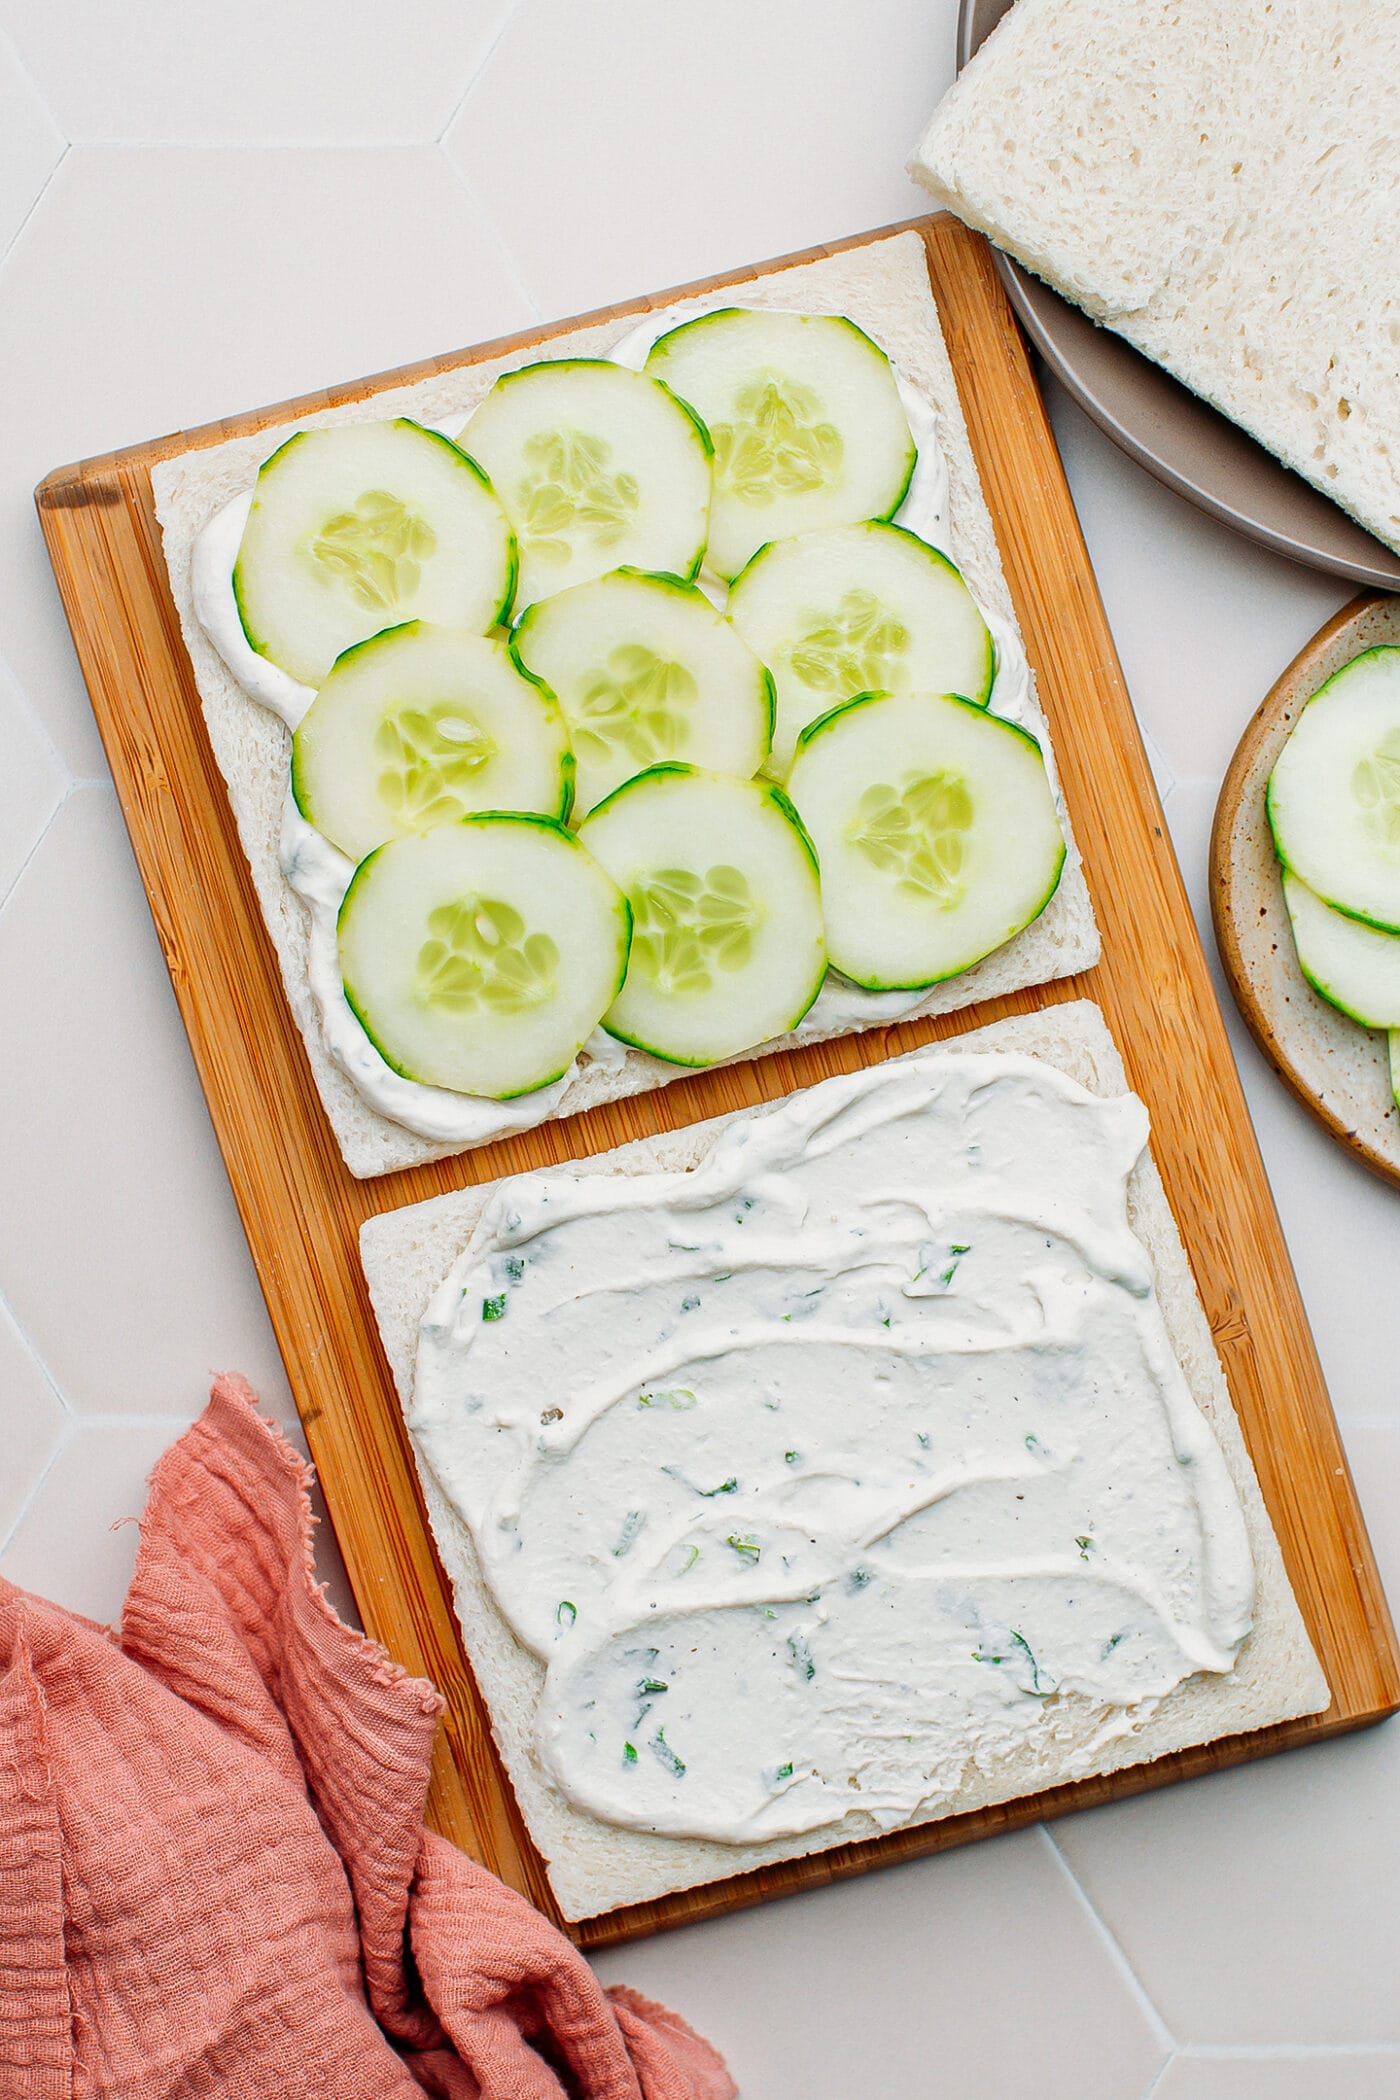 Sandwich slices topped with cucumber slices and vegan cream cheese.